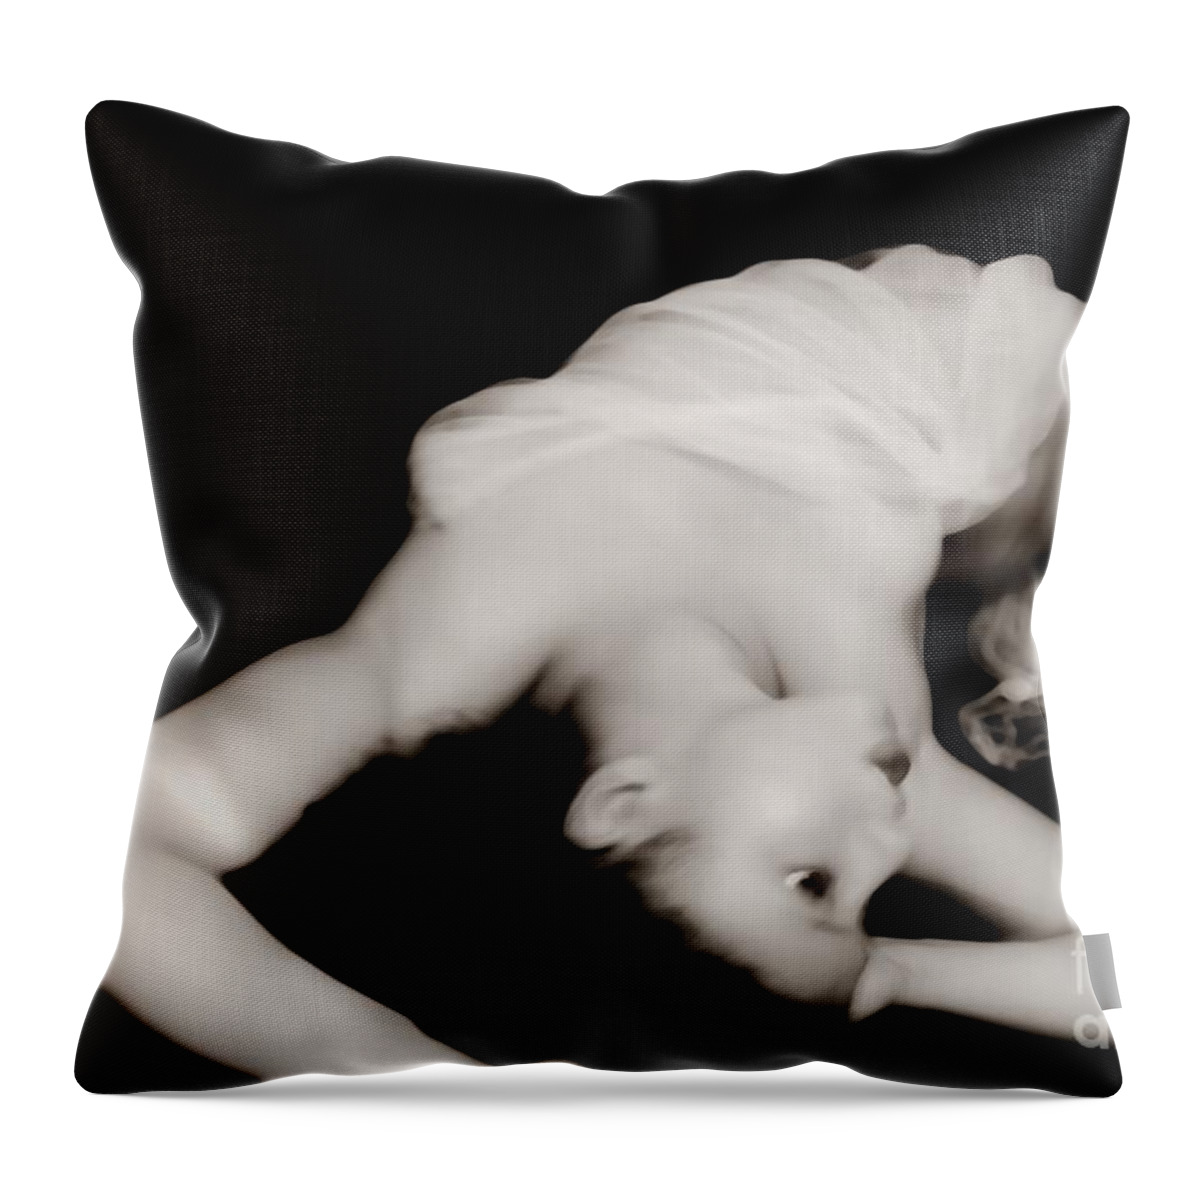 Black Throw Pillow featuring the photograph Nothingness by Jessica S